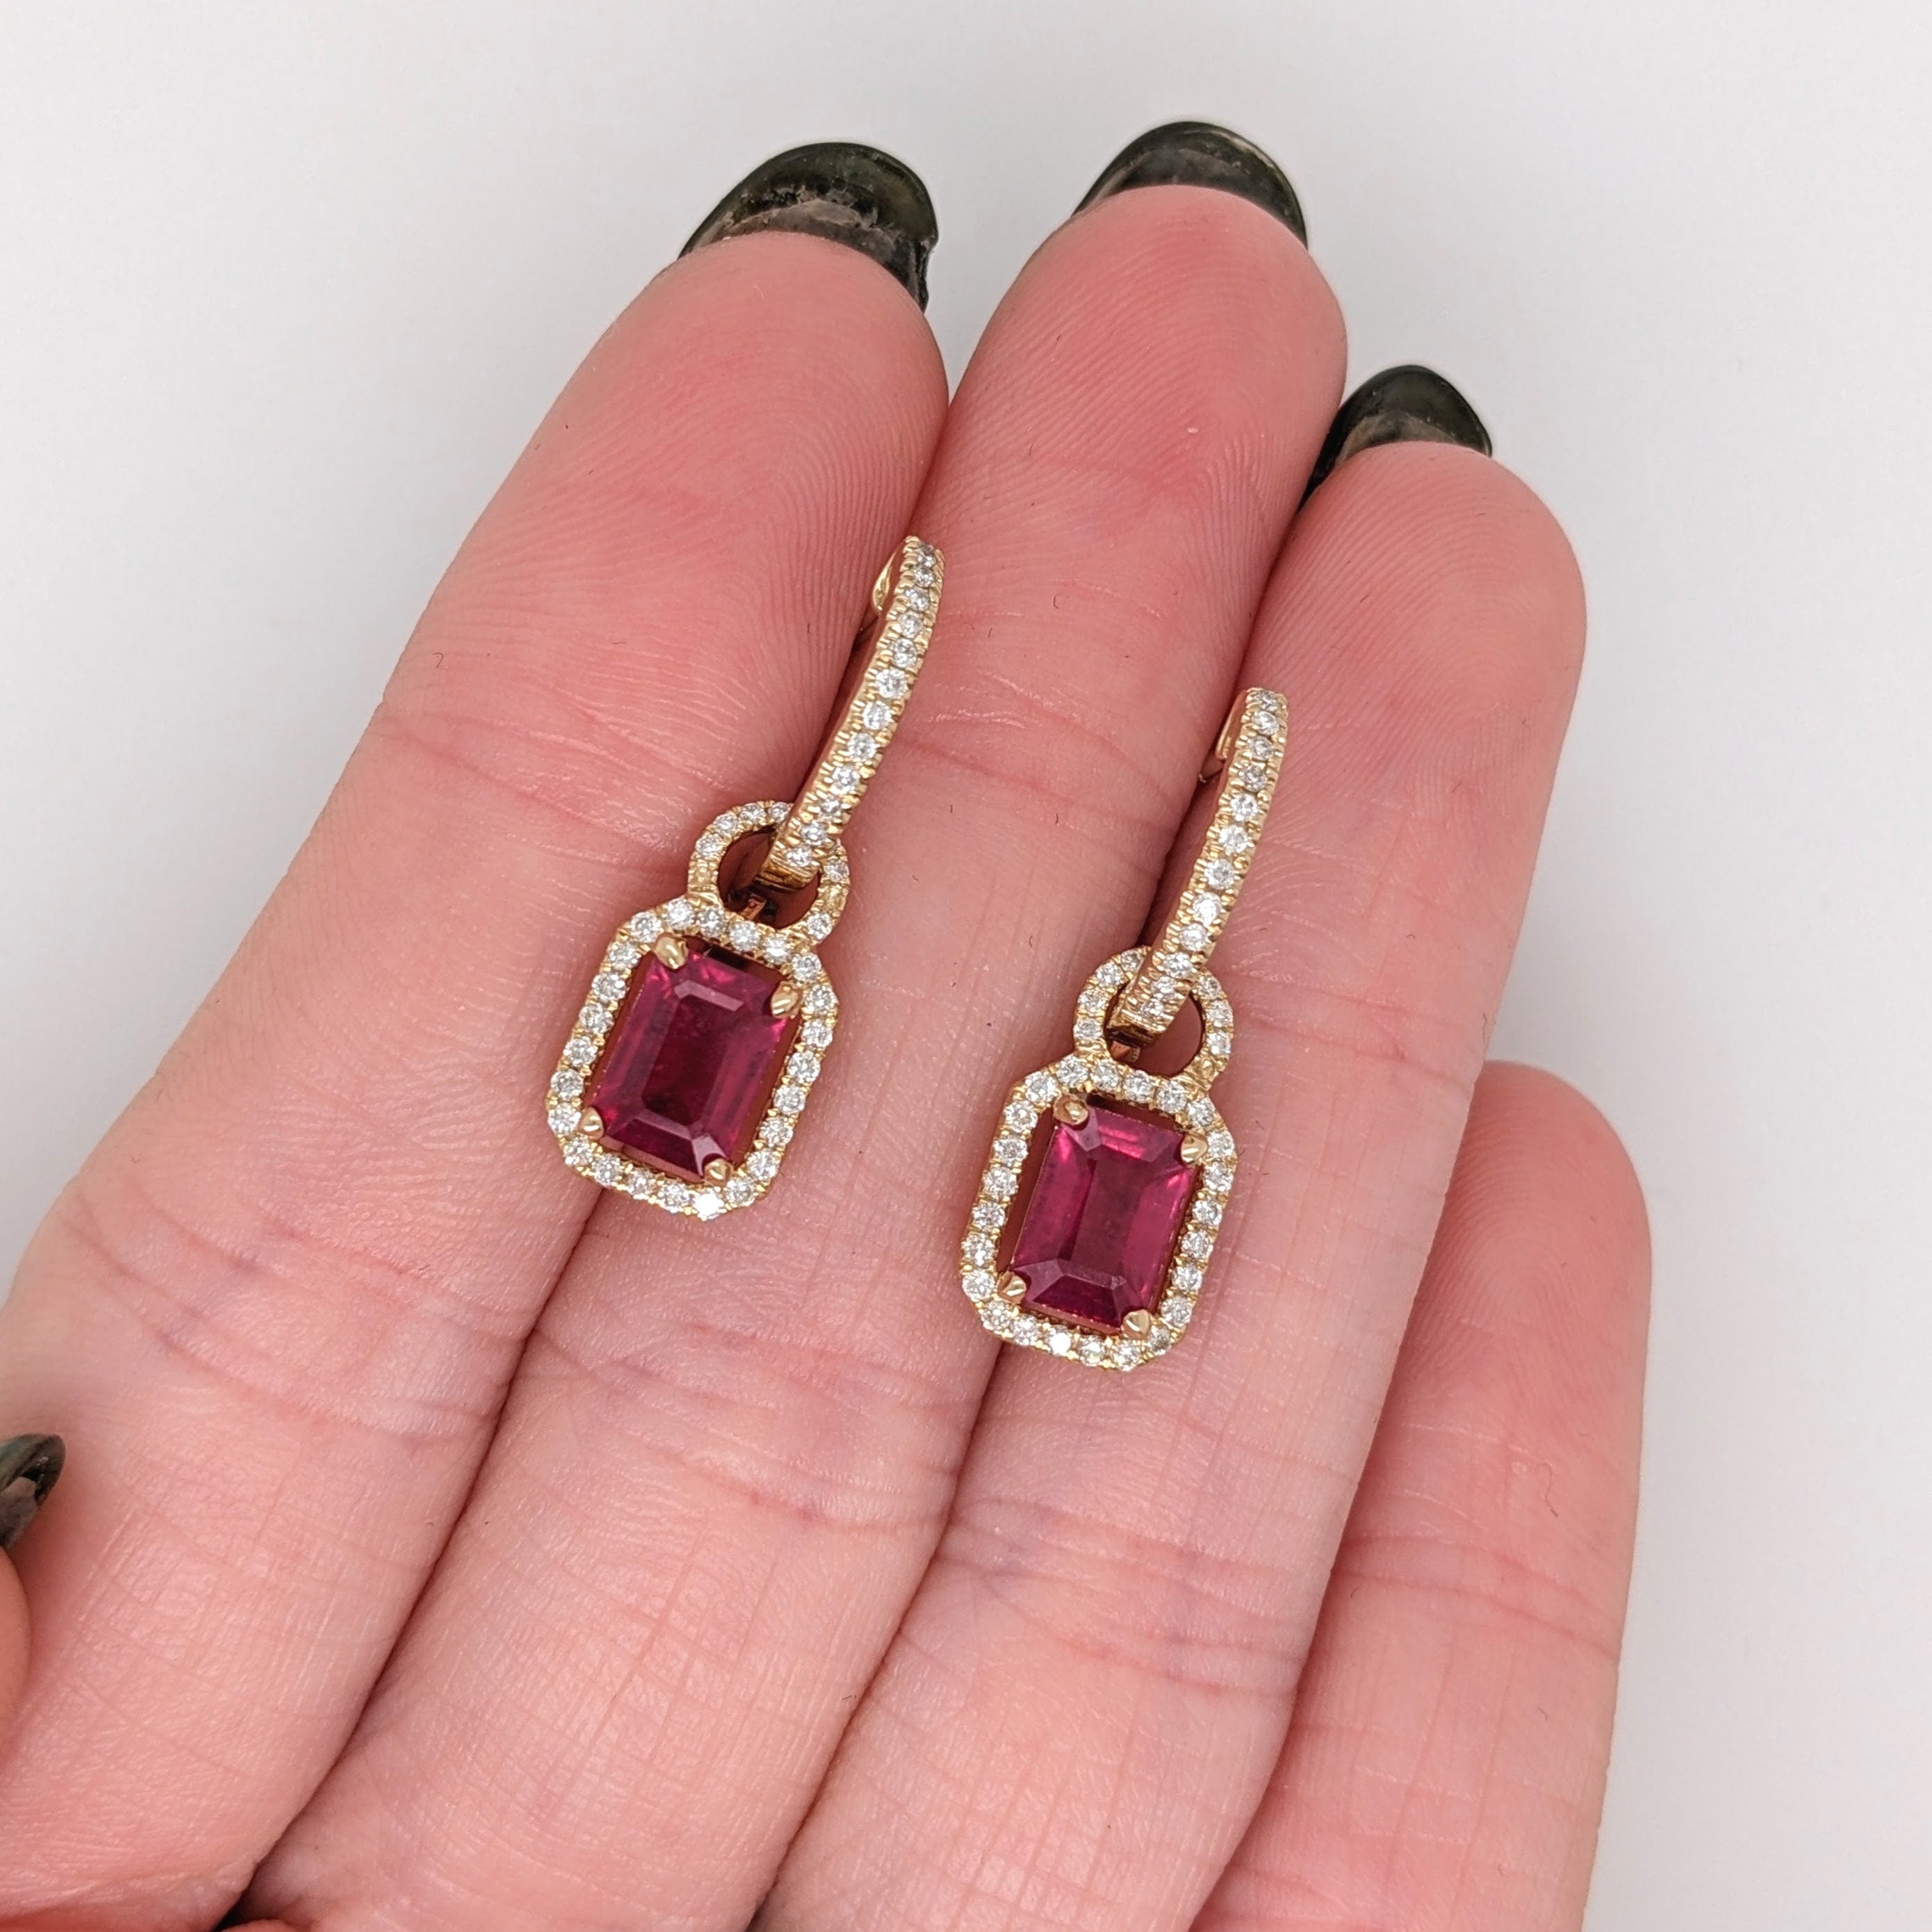 Lovely Dangle Red Ruby Earrings in 14k Solid Yellow Gold with Natural Diamond Accents | Emerald Cut 7x5mm | Red Gemstones | July Birthstone